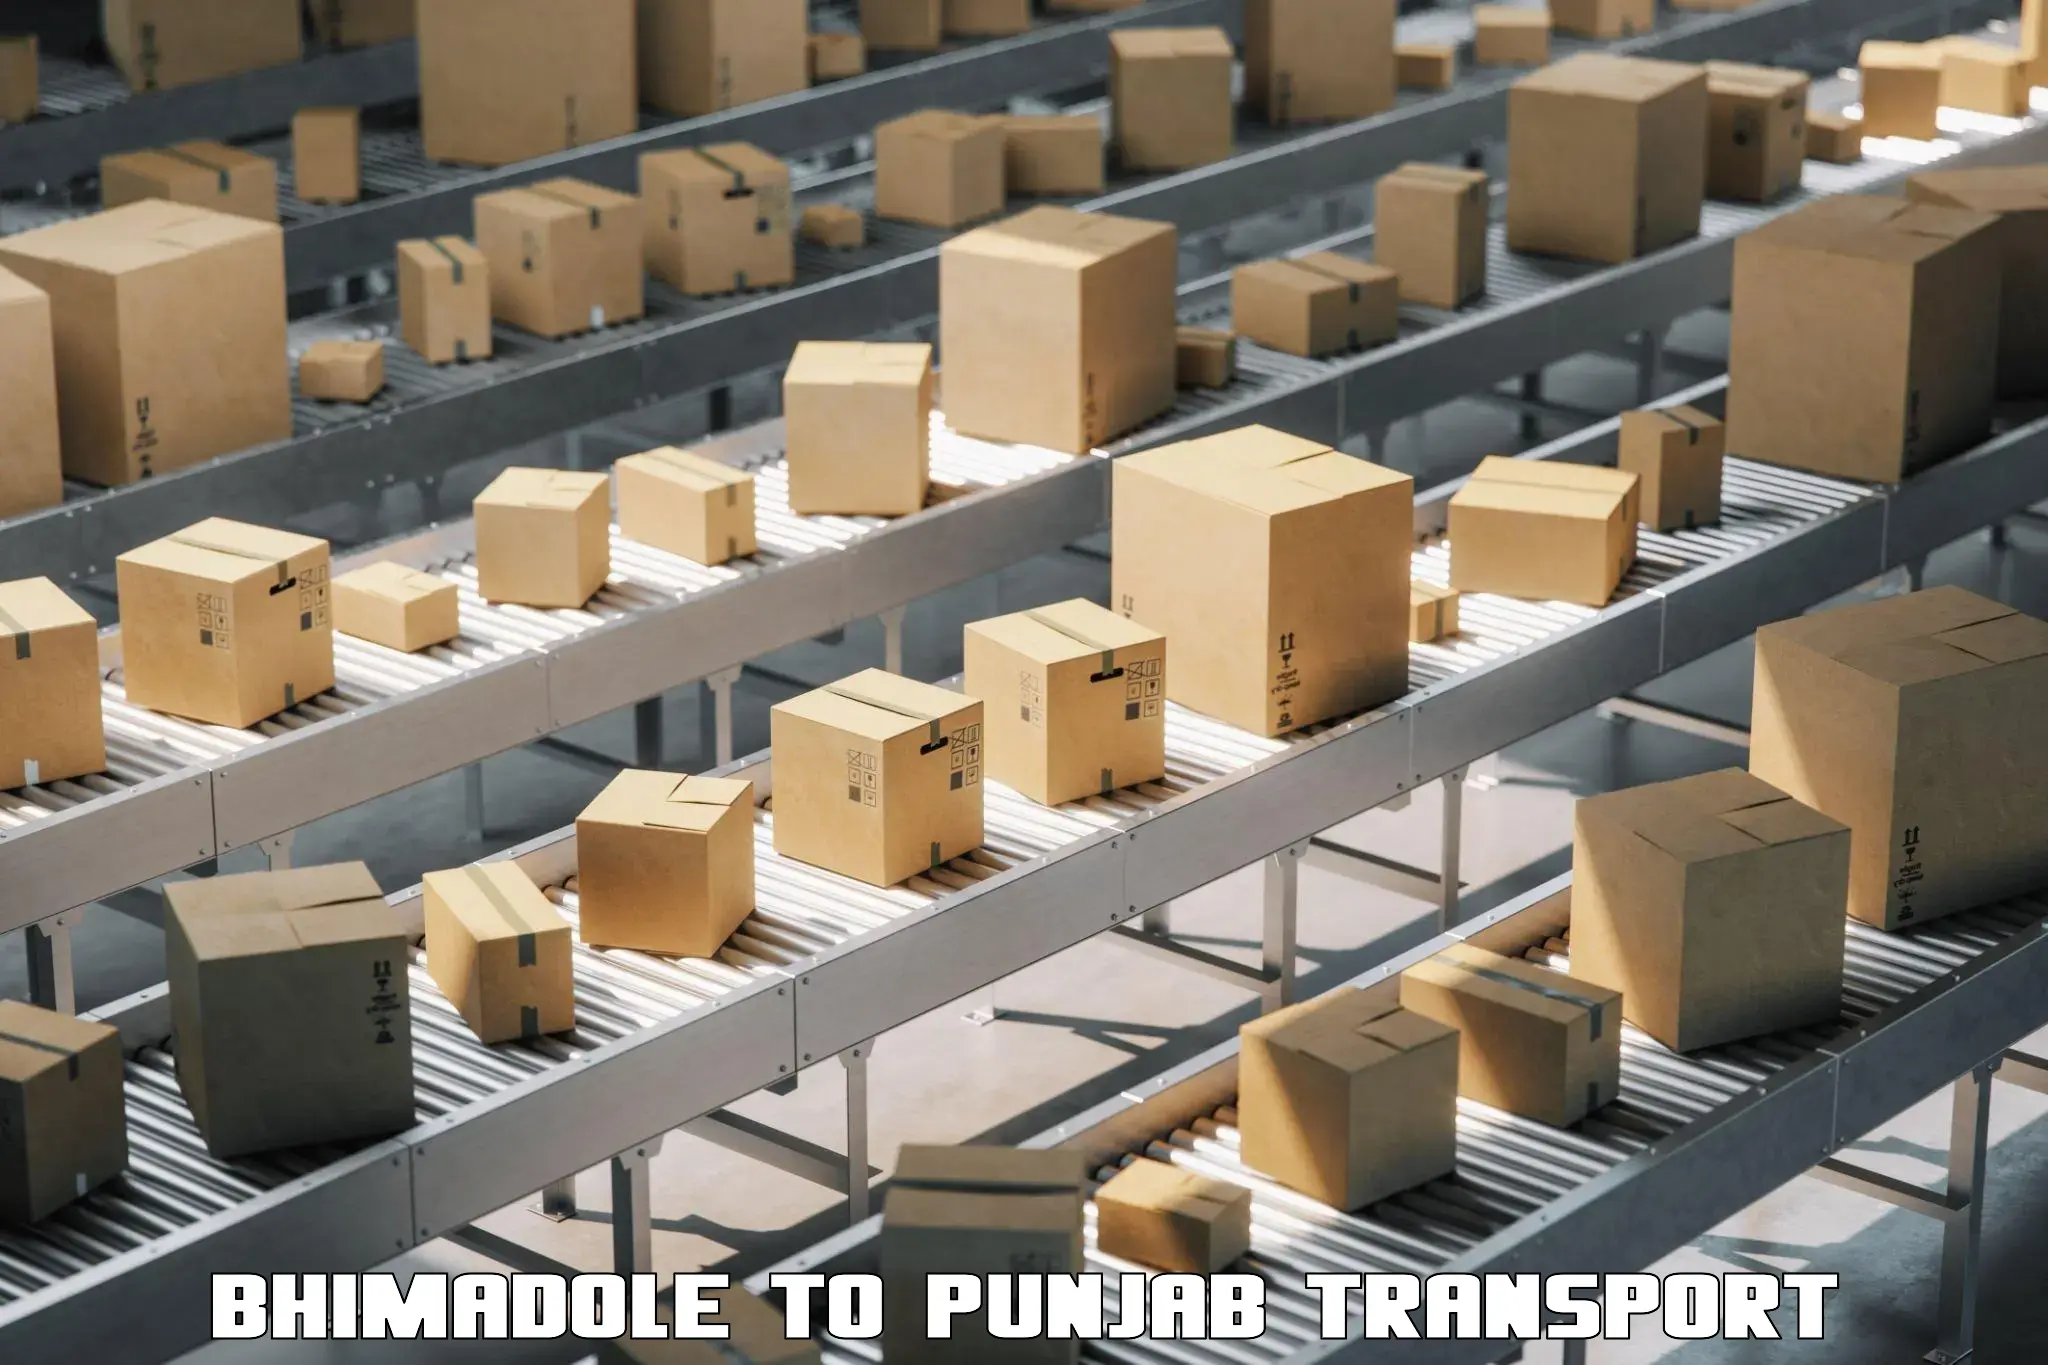 Container transport service Bhimadole to Ludhiana